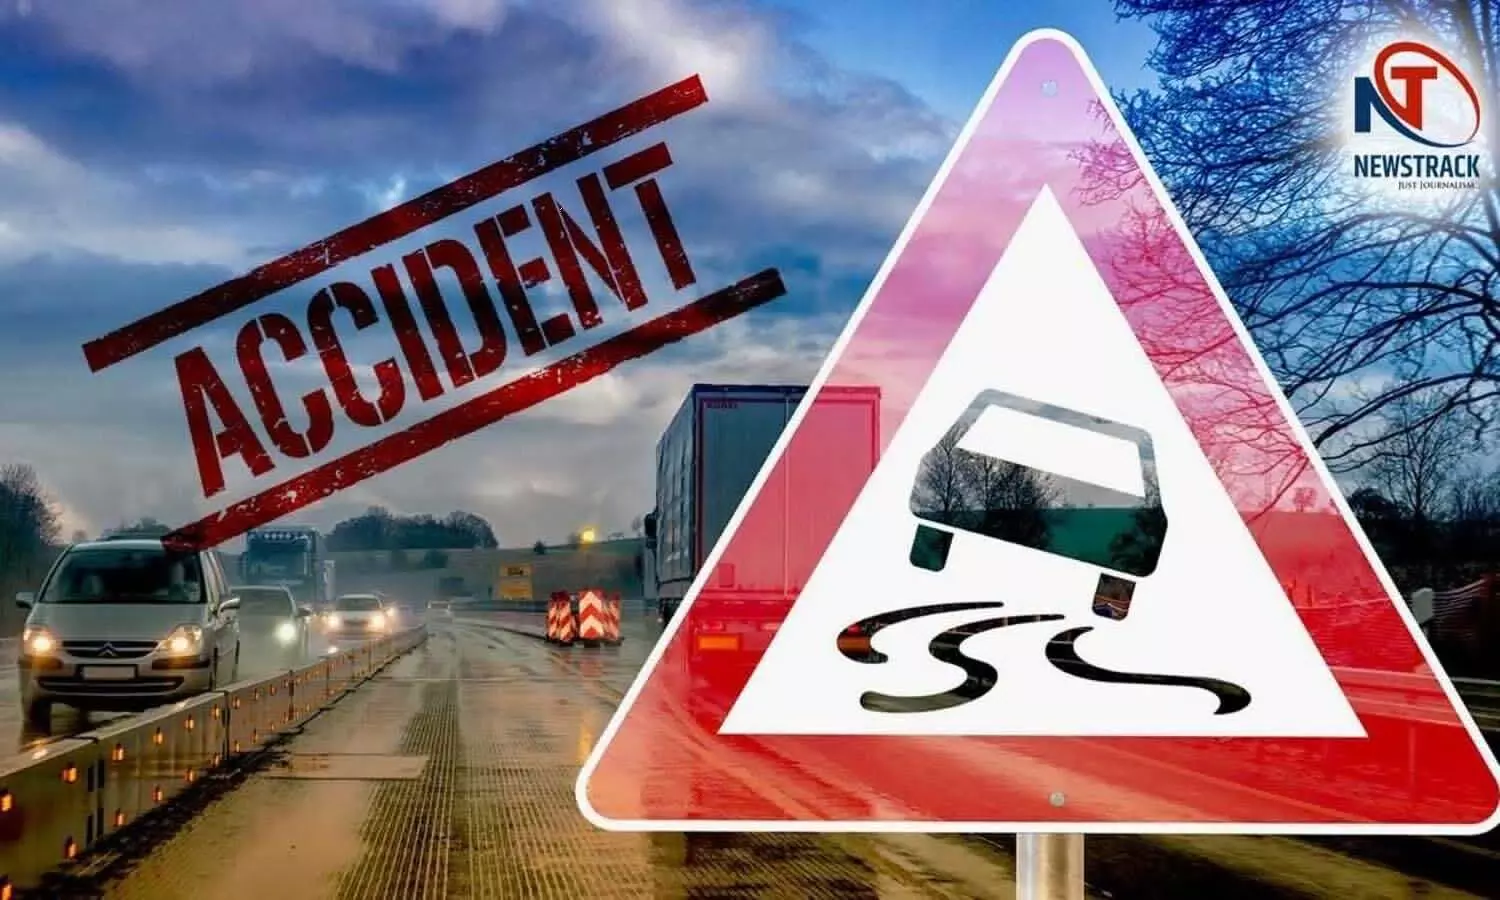 Big road accident in Bageshwar, car fell in ditch, ban imposed on trekking